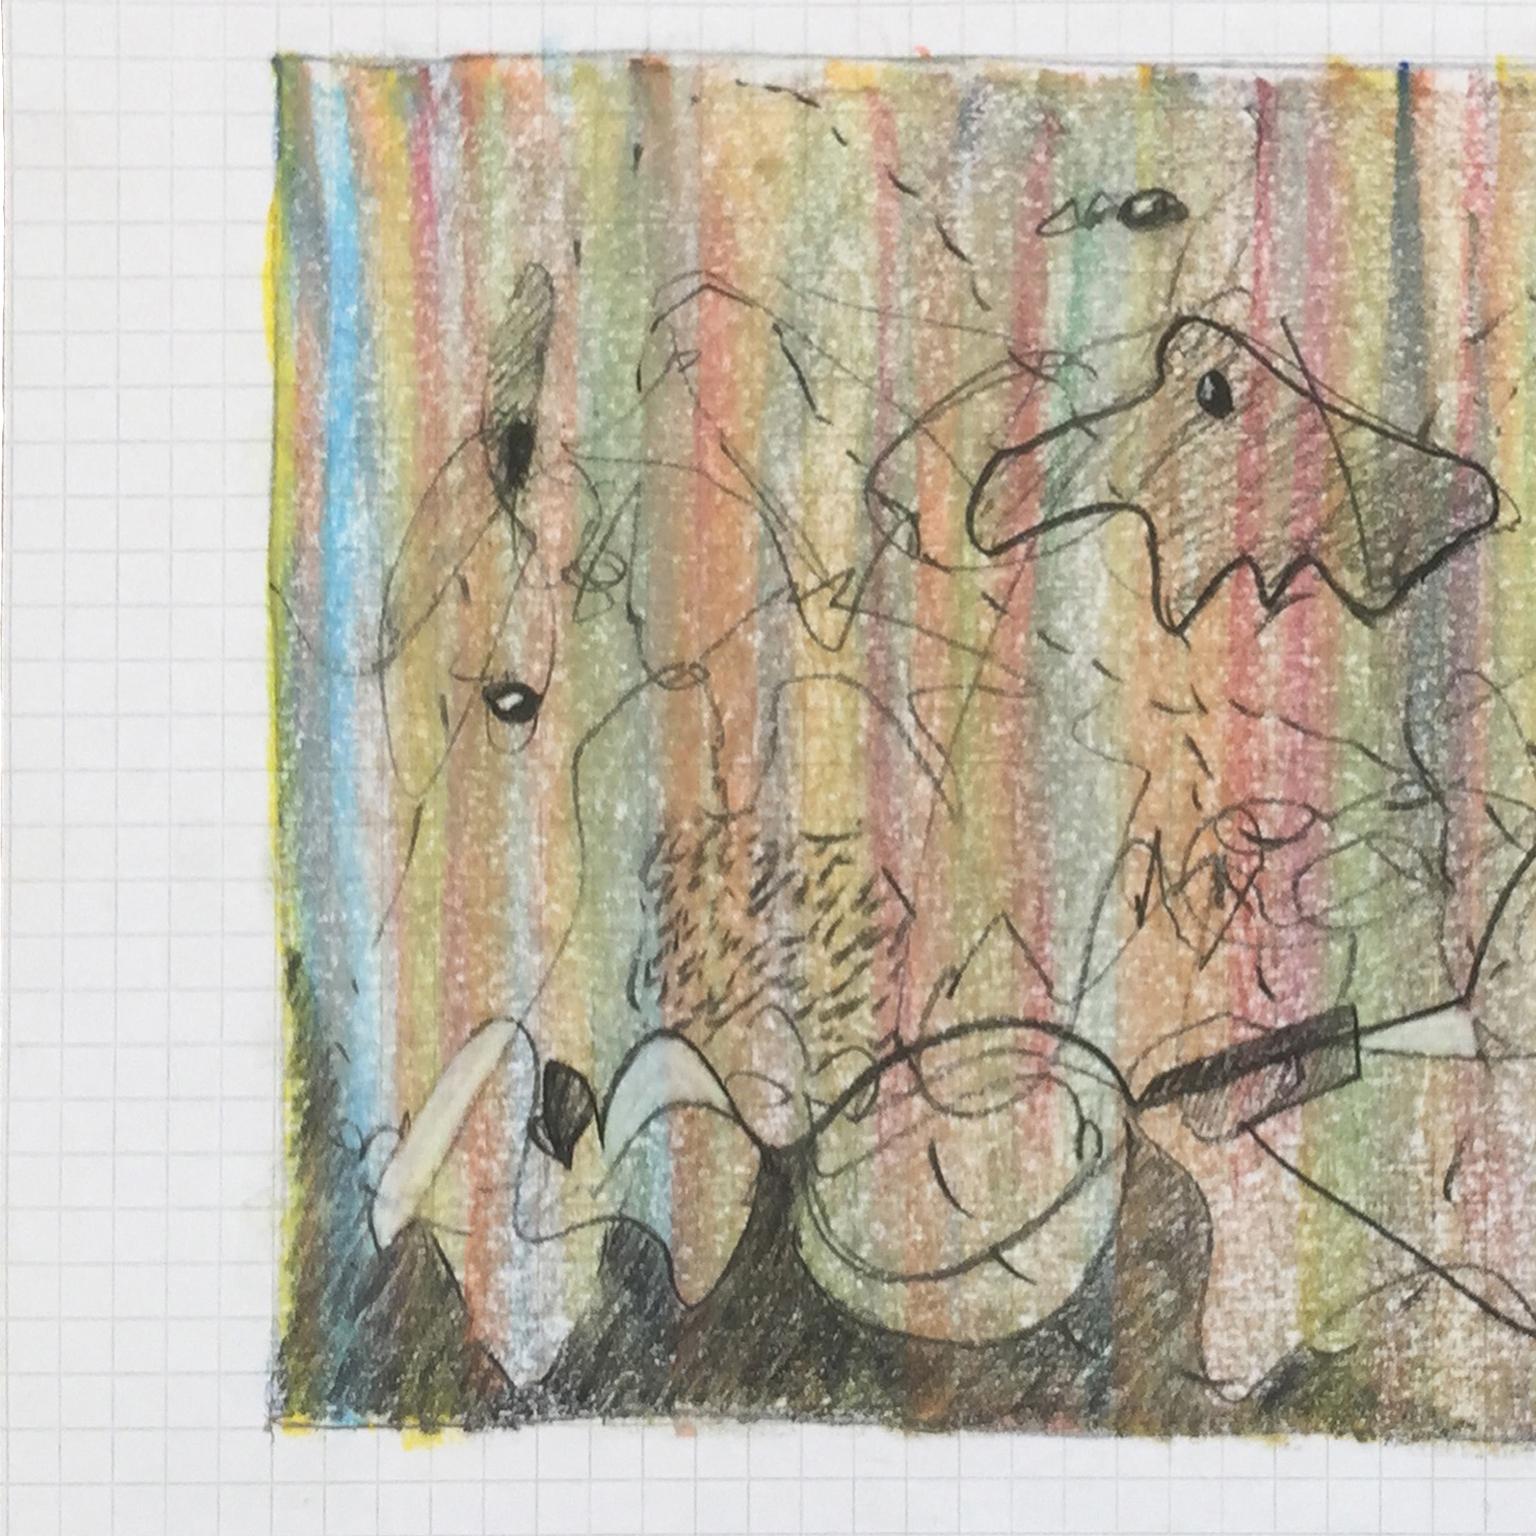 Study 08 by Bang Dang on graph paper. Abstract with crayon, pastel & fine lines  2